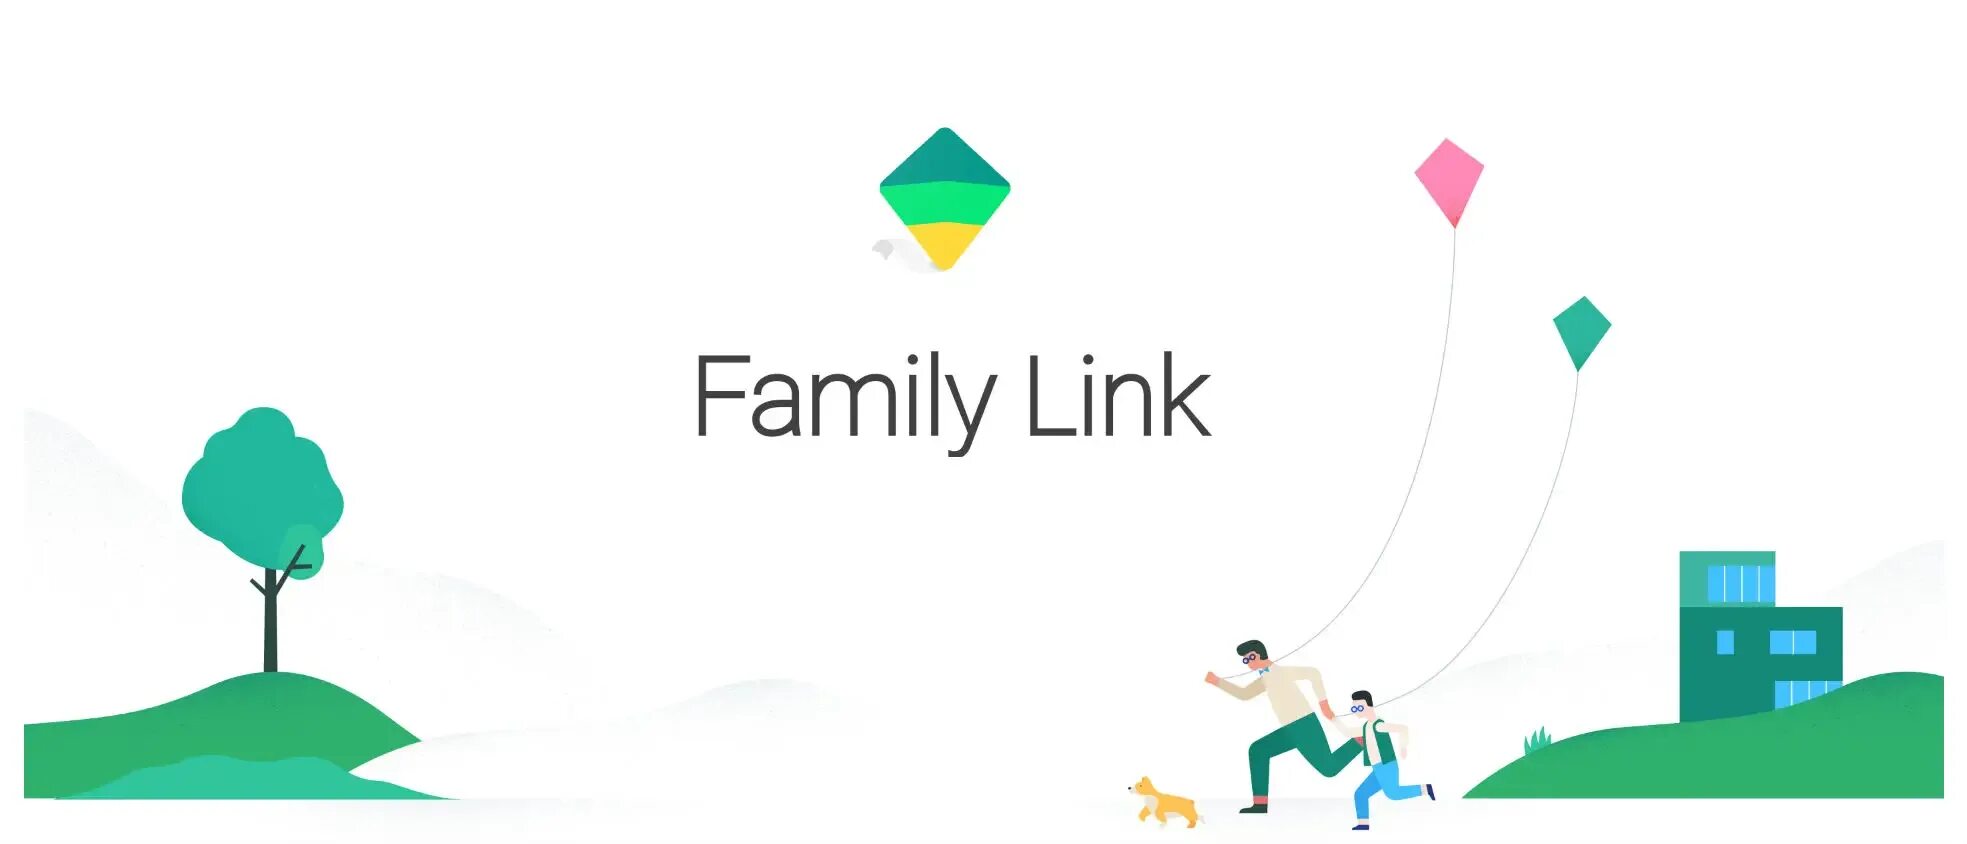 Https family link ru. Фэмили линк. Гугл Фэмили линк. Фэмили линк картинка. Значок Family link.